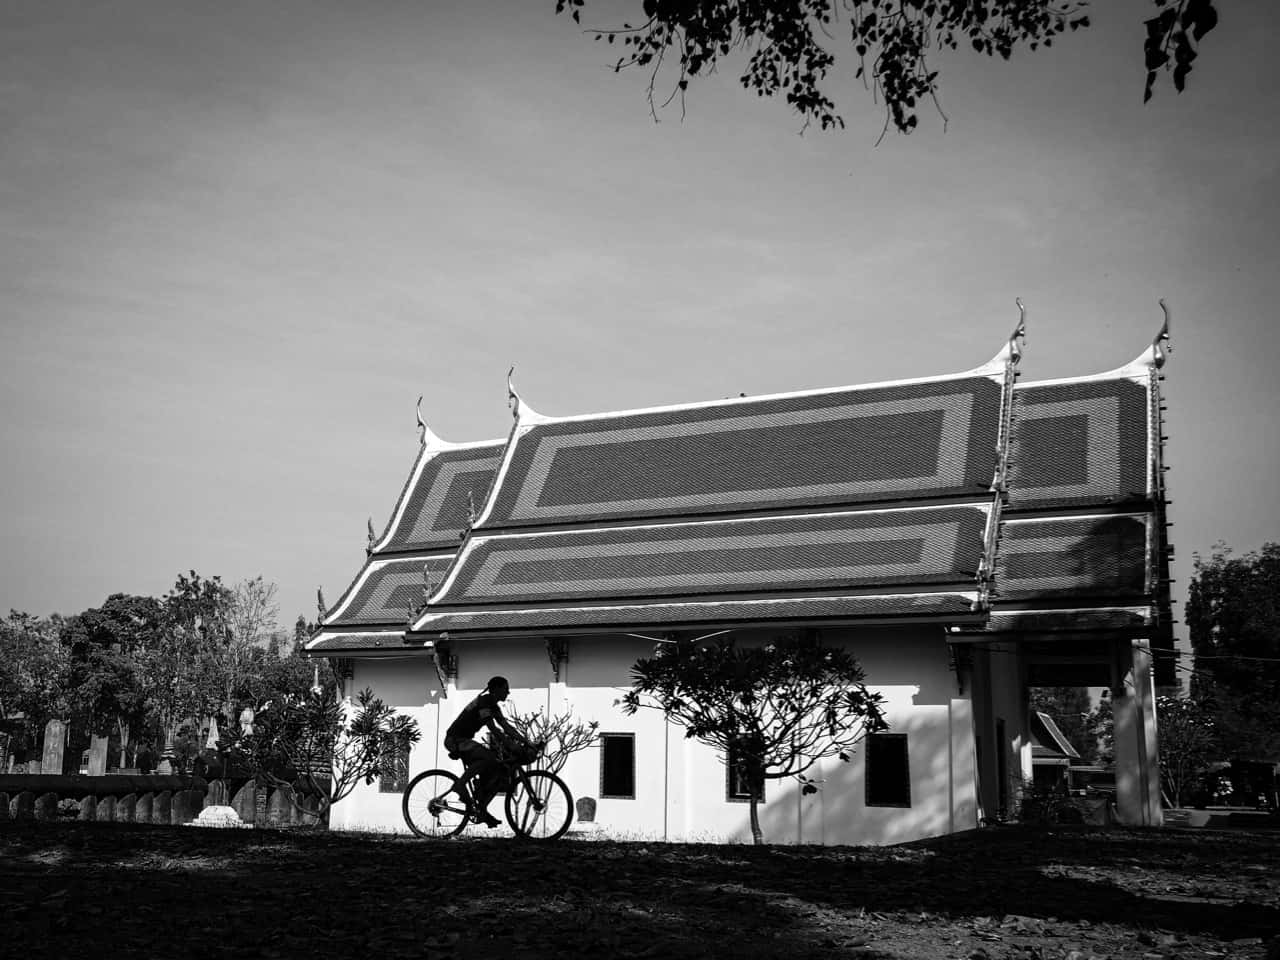 gravel cyclists passing old temple in Thailand black and white image